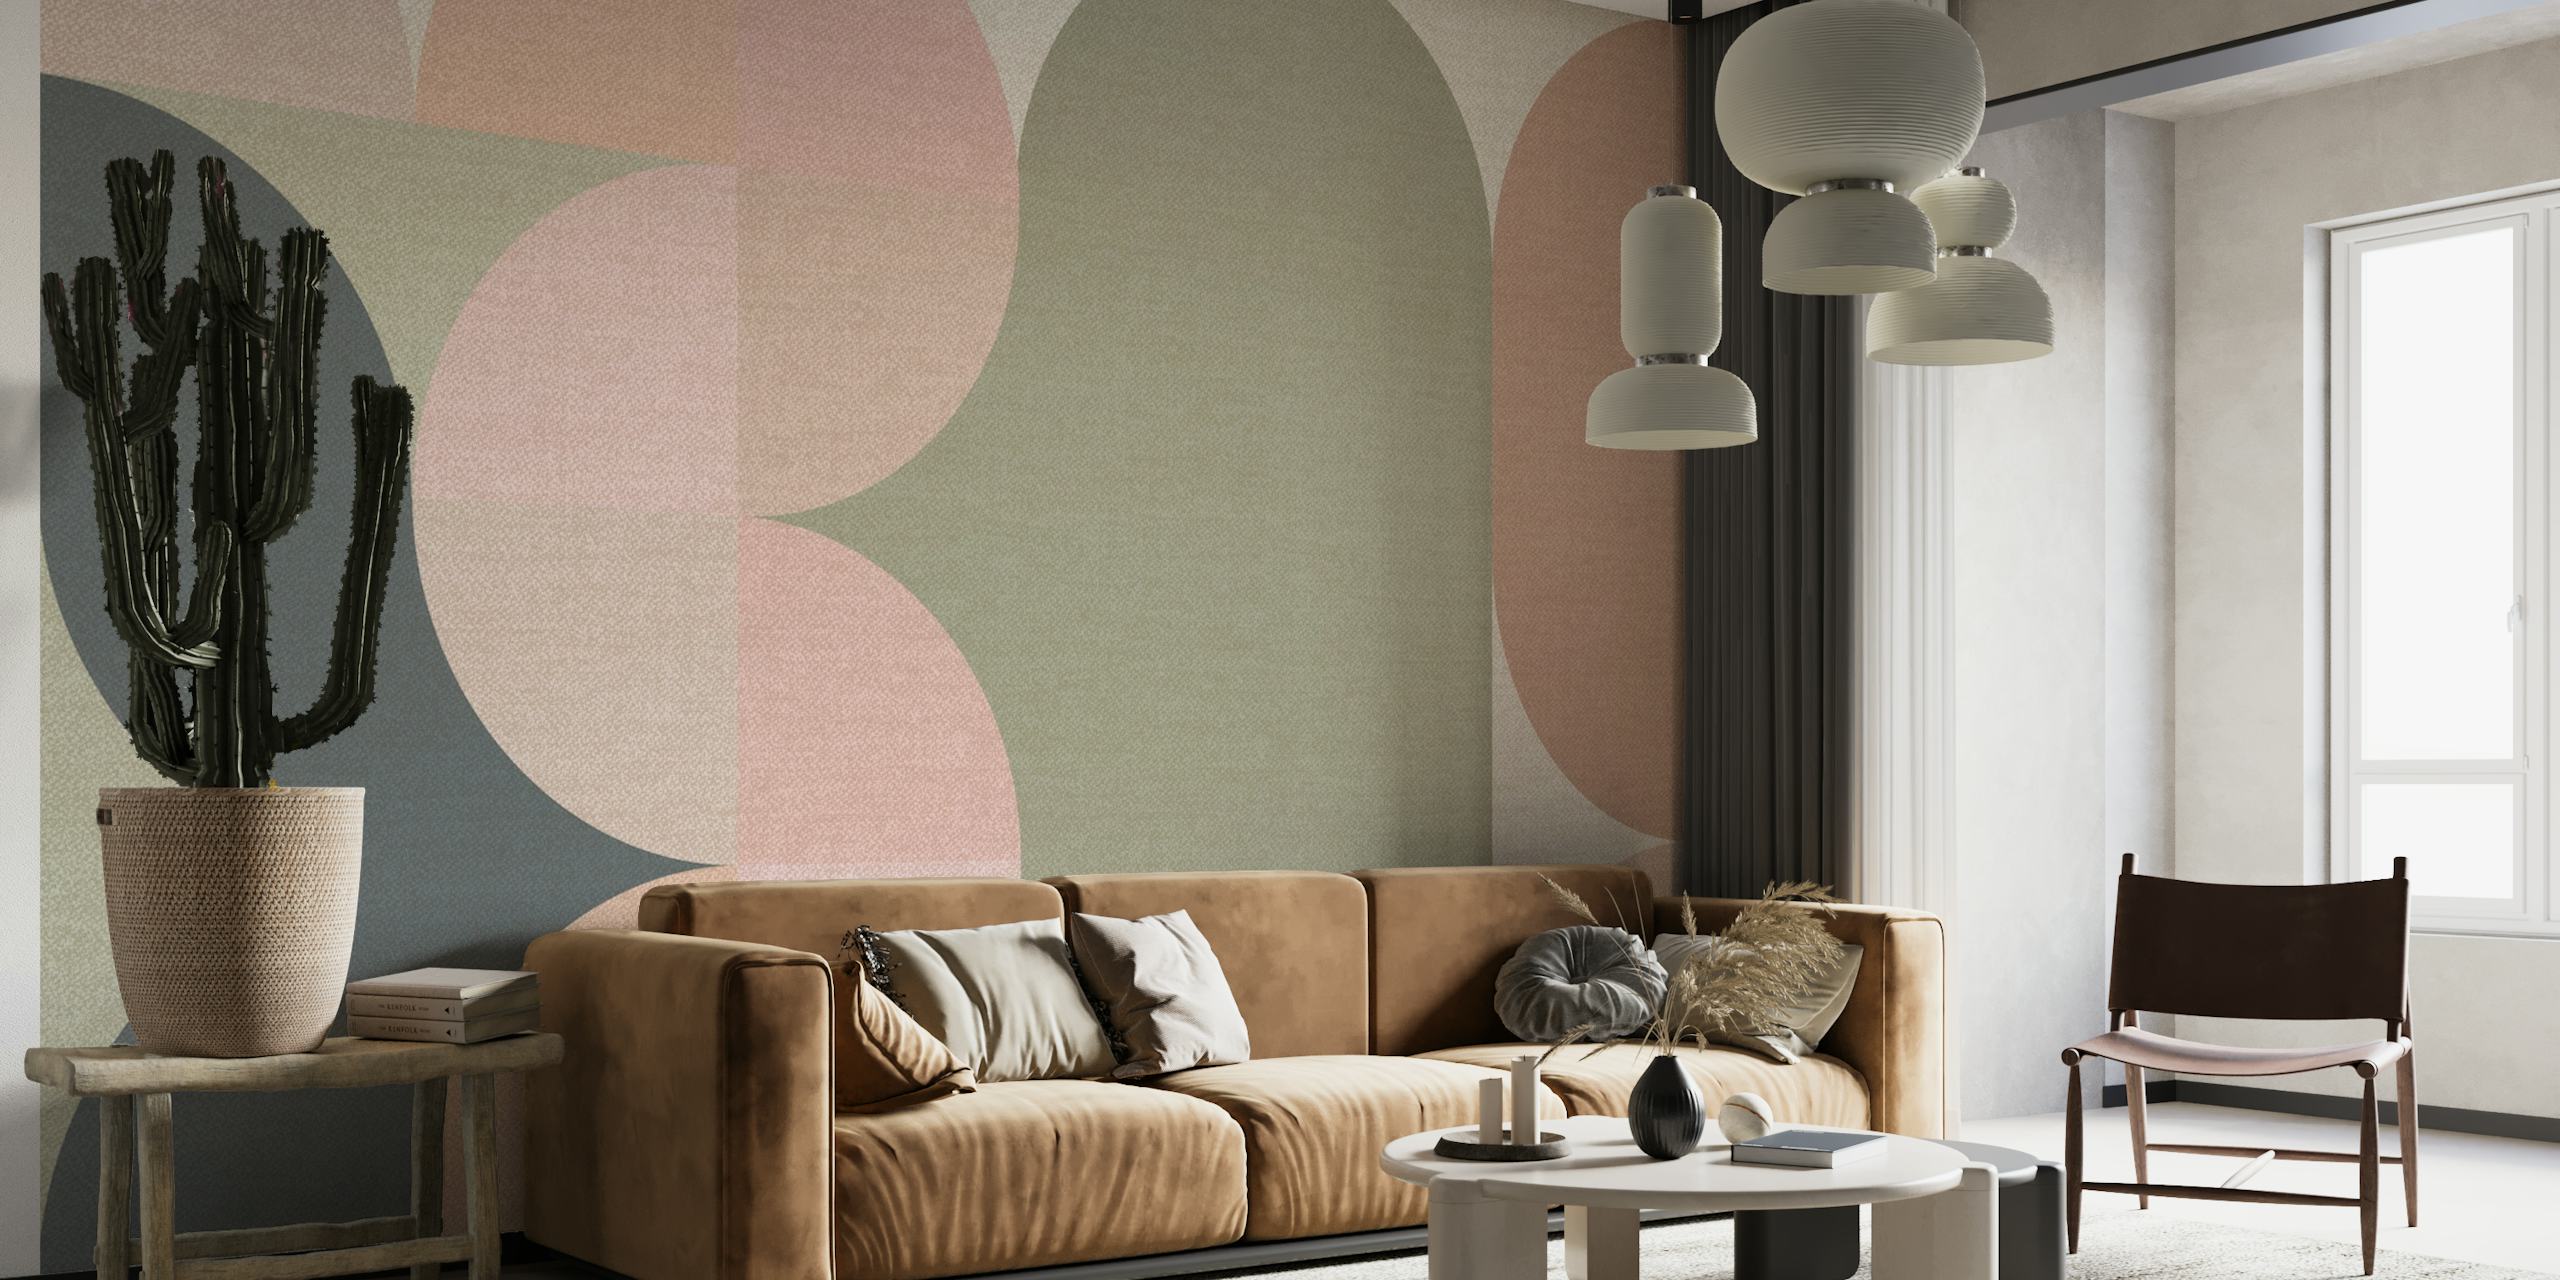 Muted Geometric Mid-Century Abstract Rounds wallpaper